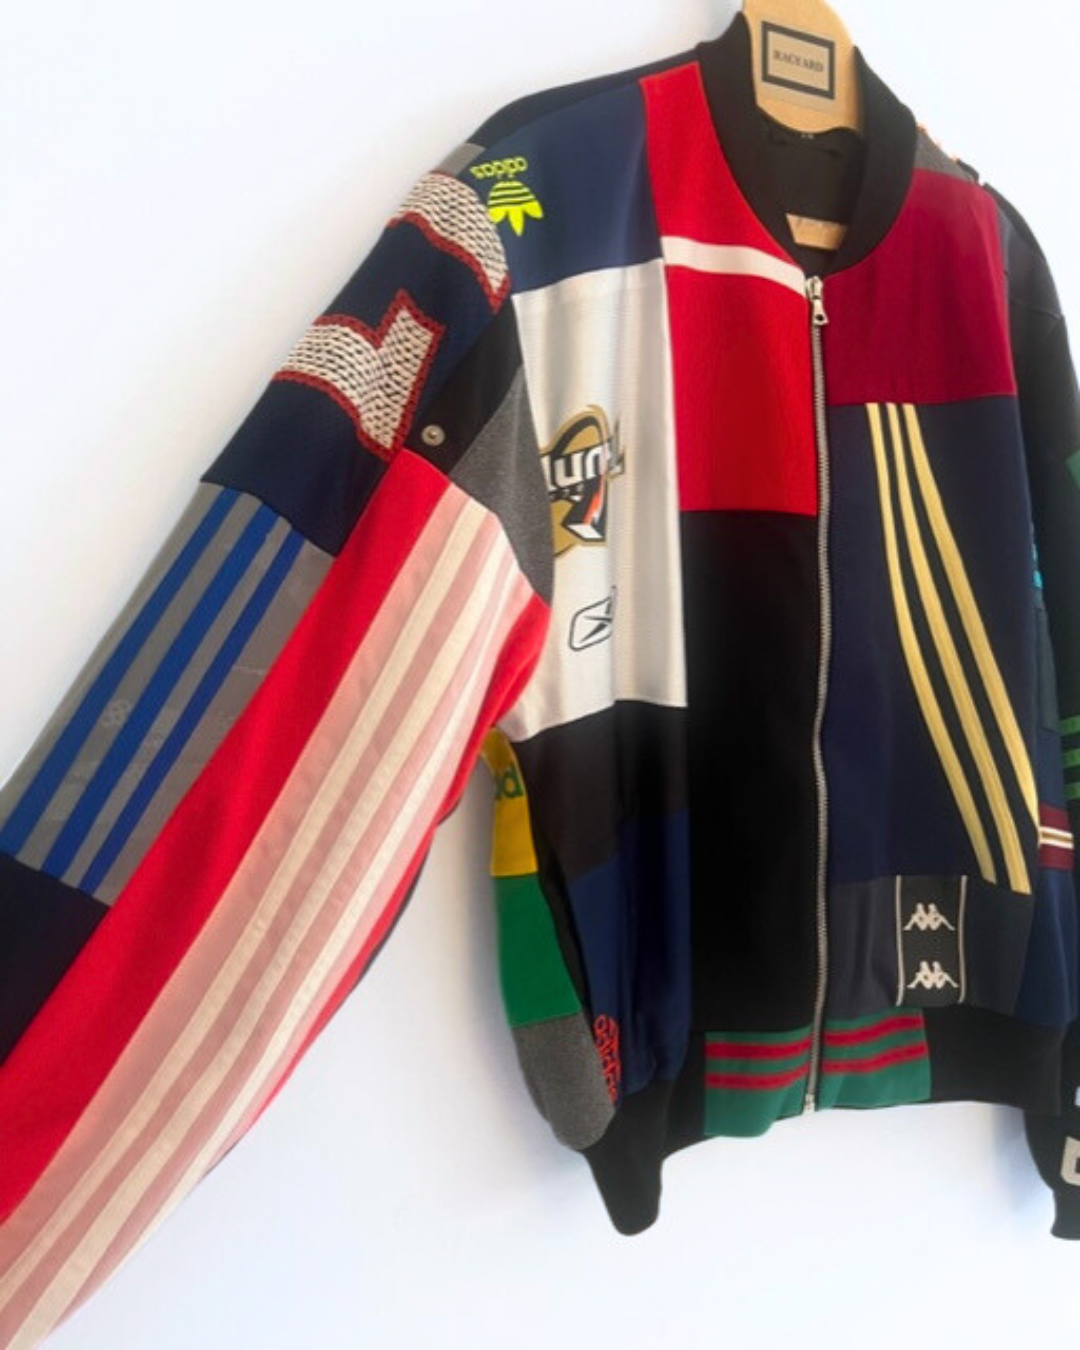 ONE OFF BOMBER Jacket made from Vintage sportswear panelling